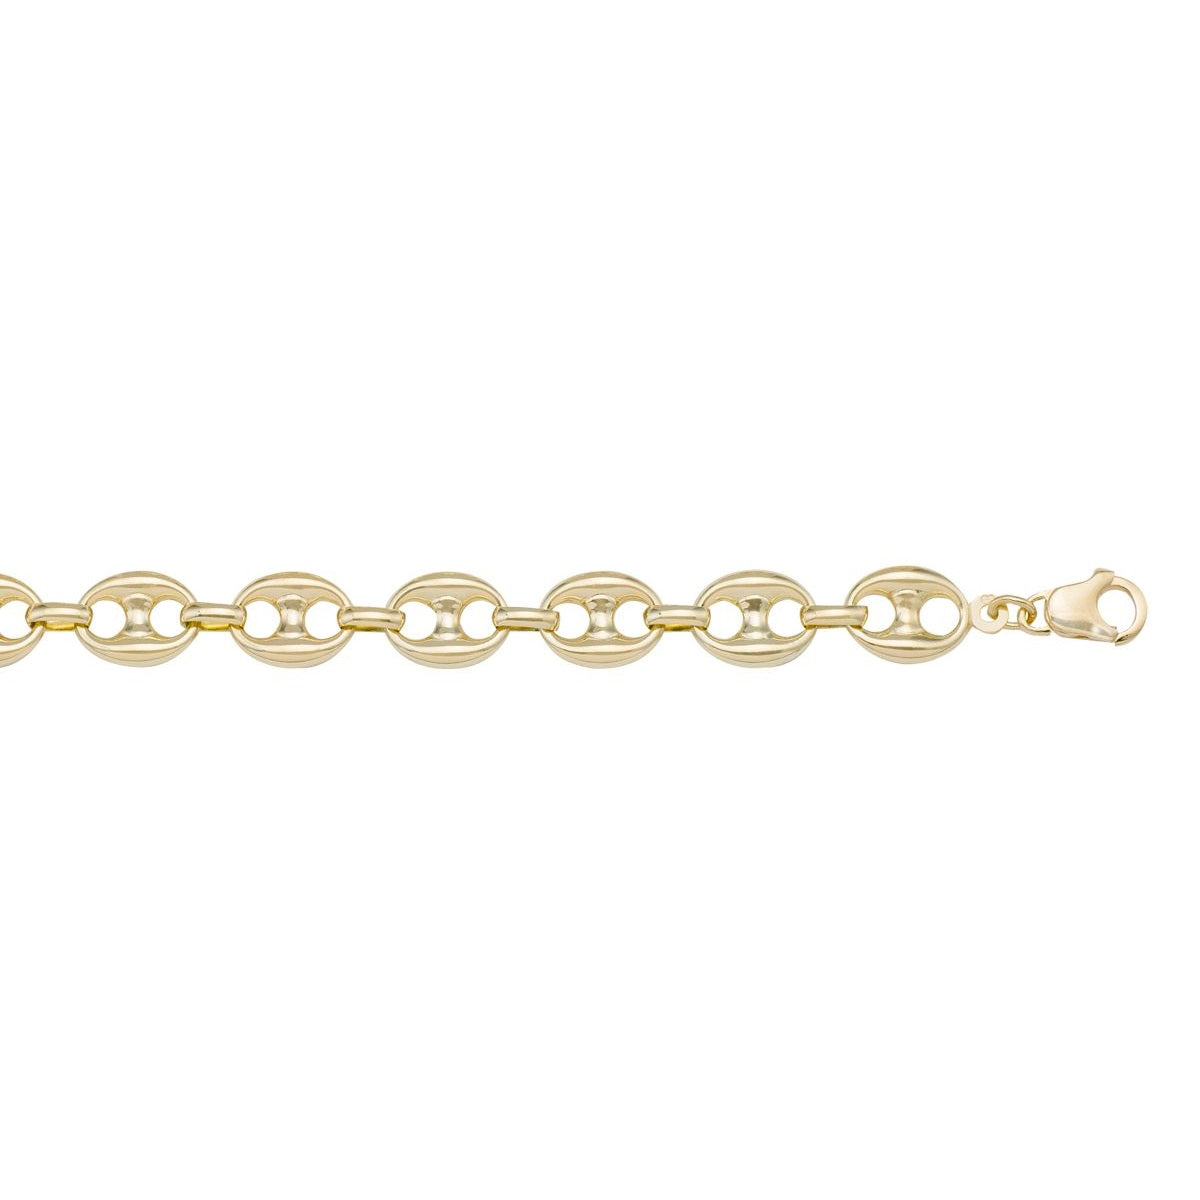 CANC03, Gold Bracelet, Hollow Puffed Anchor, Yellow Gold